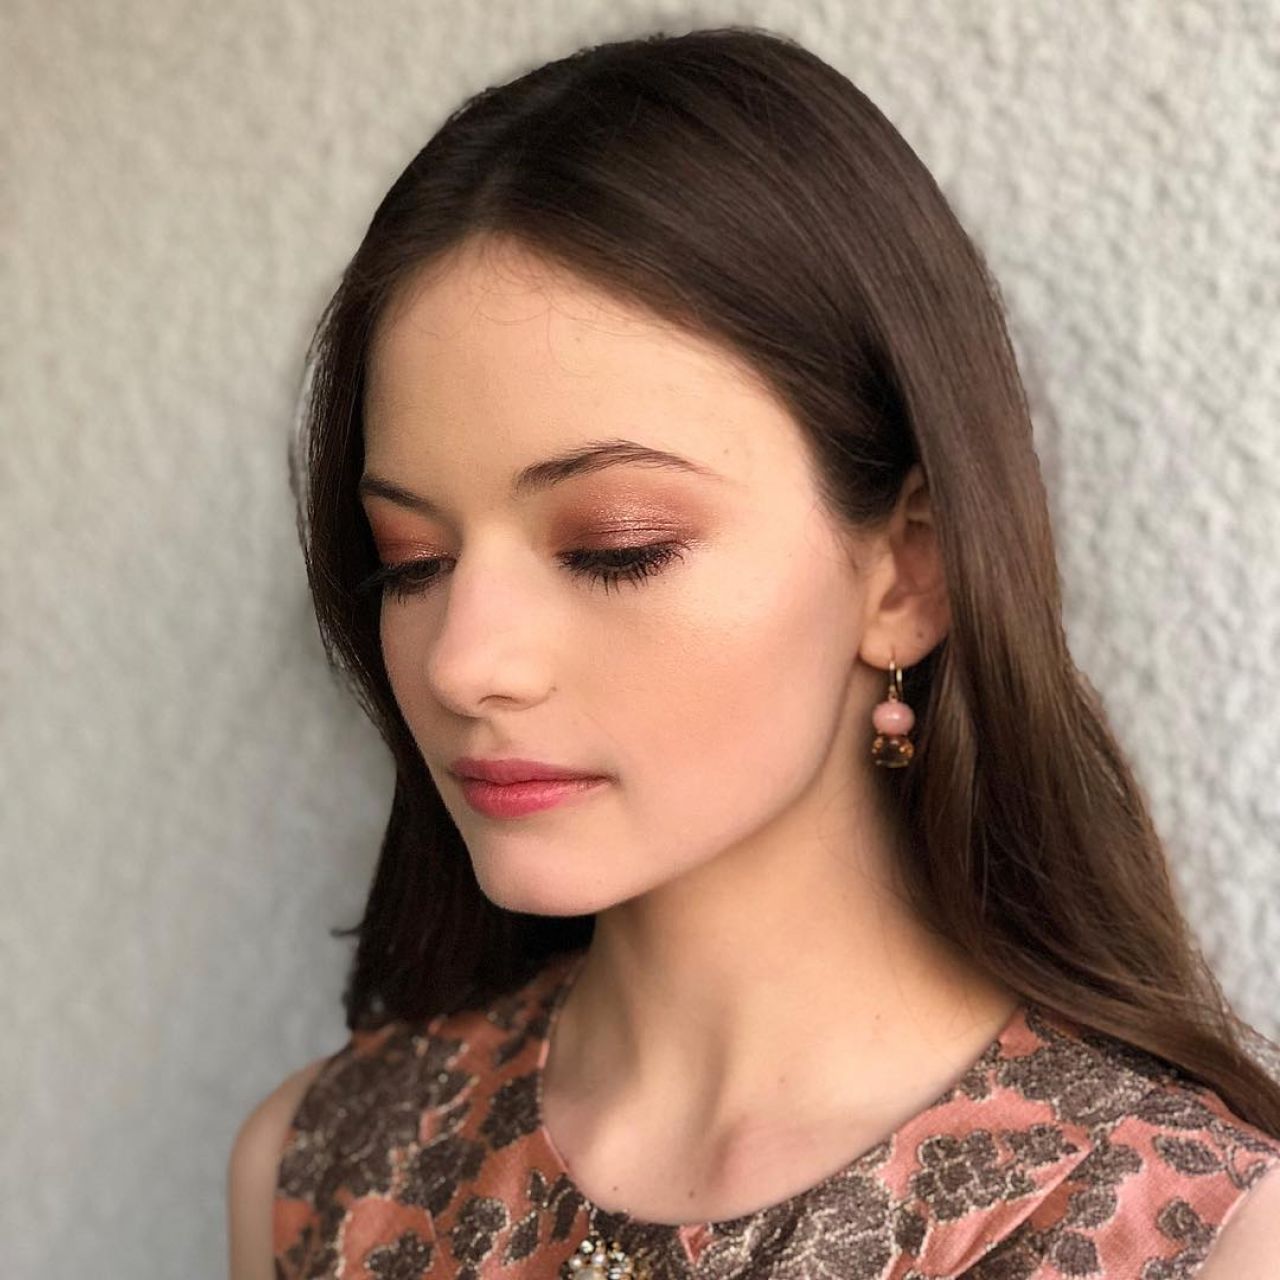 Into the woods | Ft. S3th Mackenzie-foy-personal-pics-10-17-2018-7